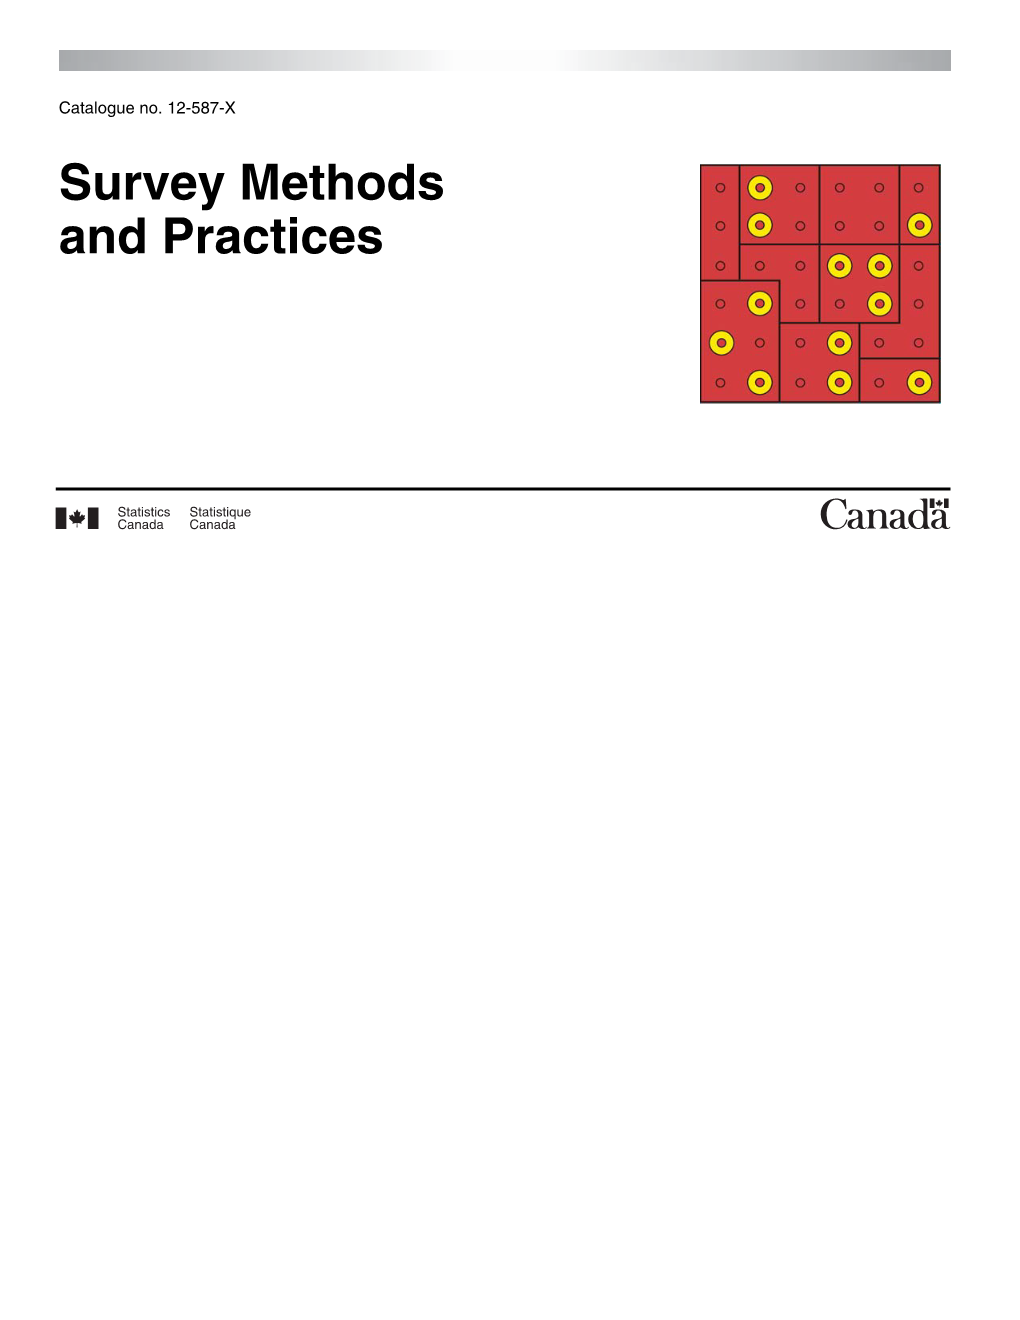 Survey Methods and Practices